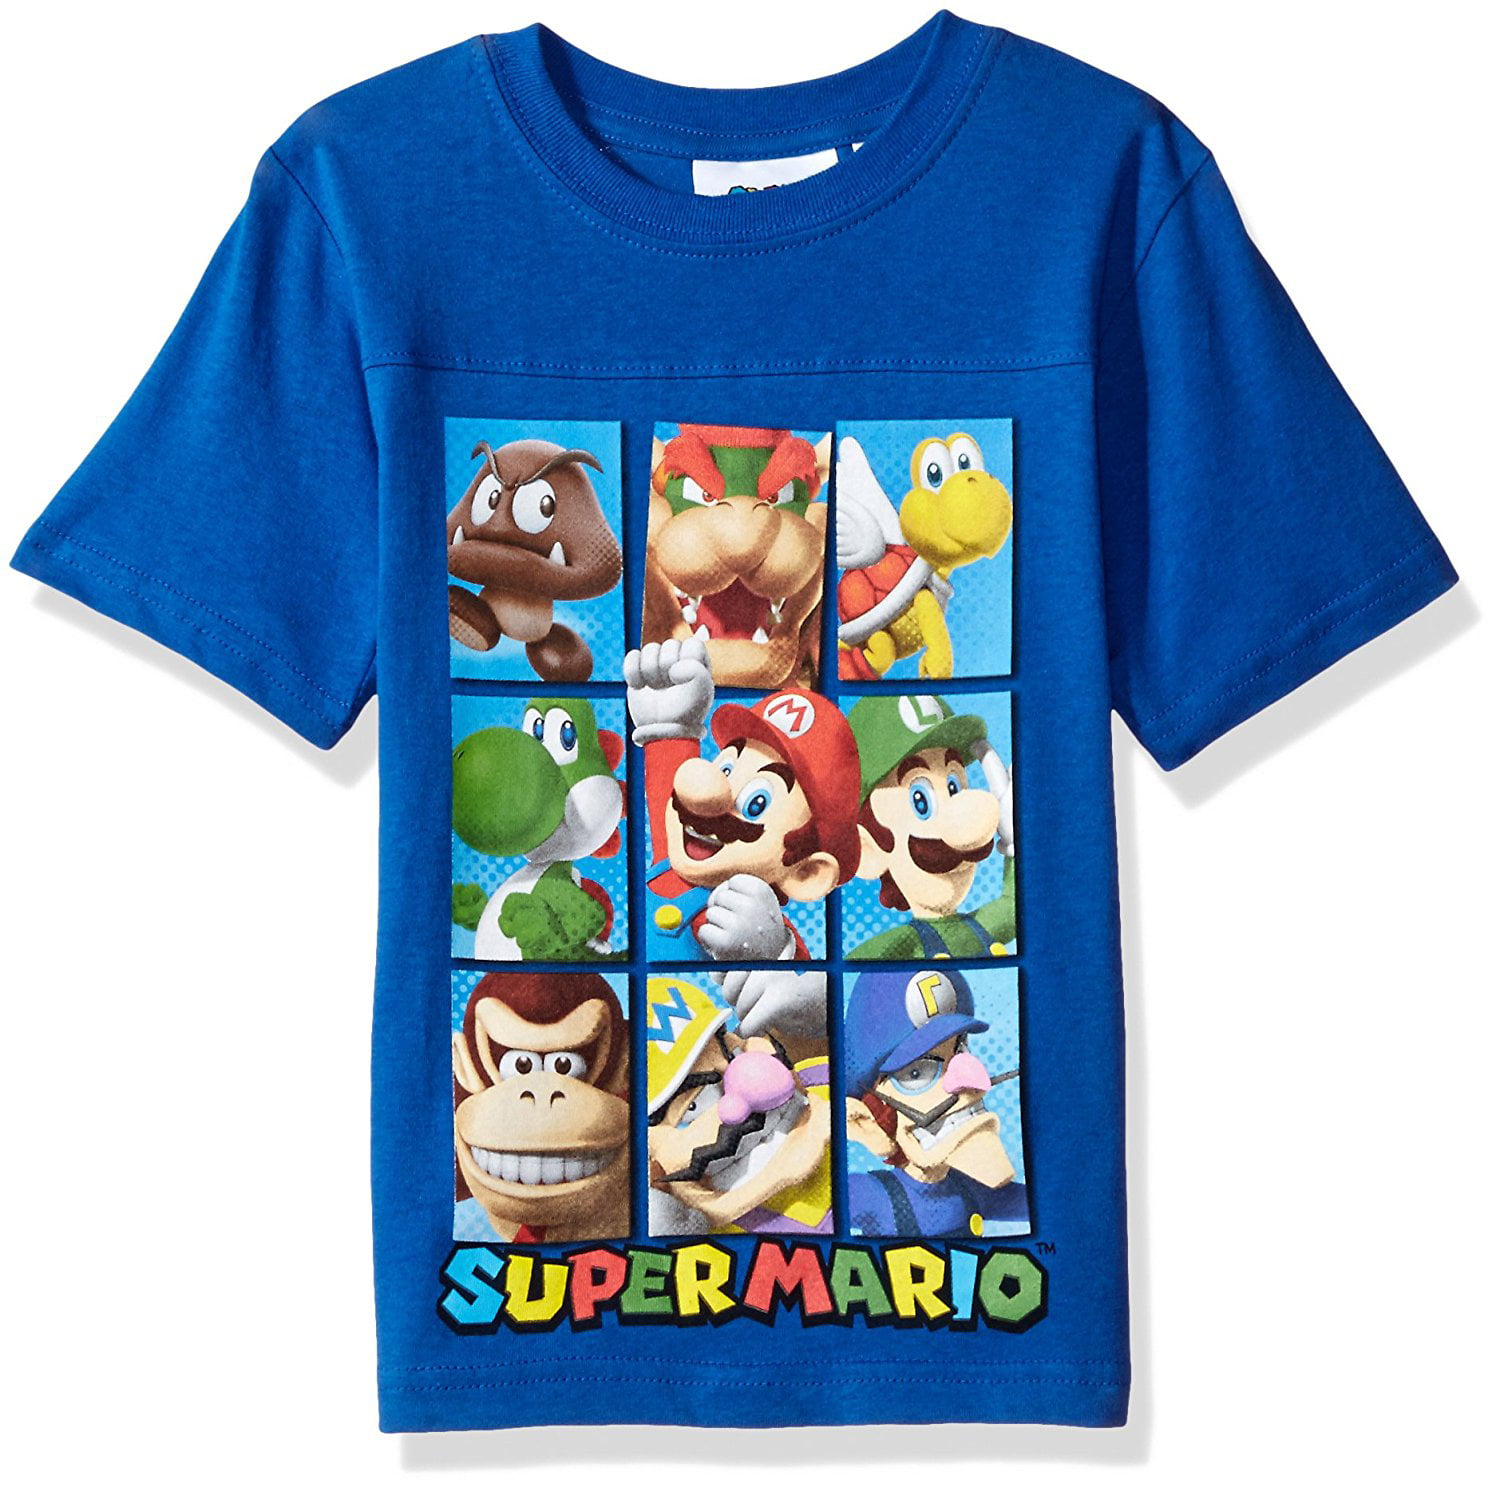 Ages 5-15 Official Merchandise 1980s Classic Video Game Crew Neck Graphic Tee Birthday Gift Idea for Boys Super Mario Character Tiles Boys T-Shirt